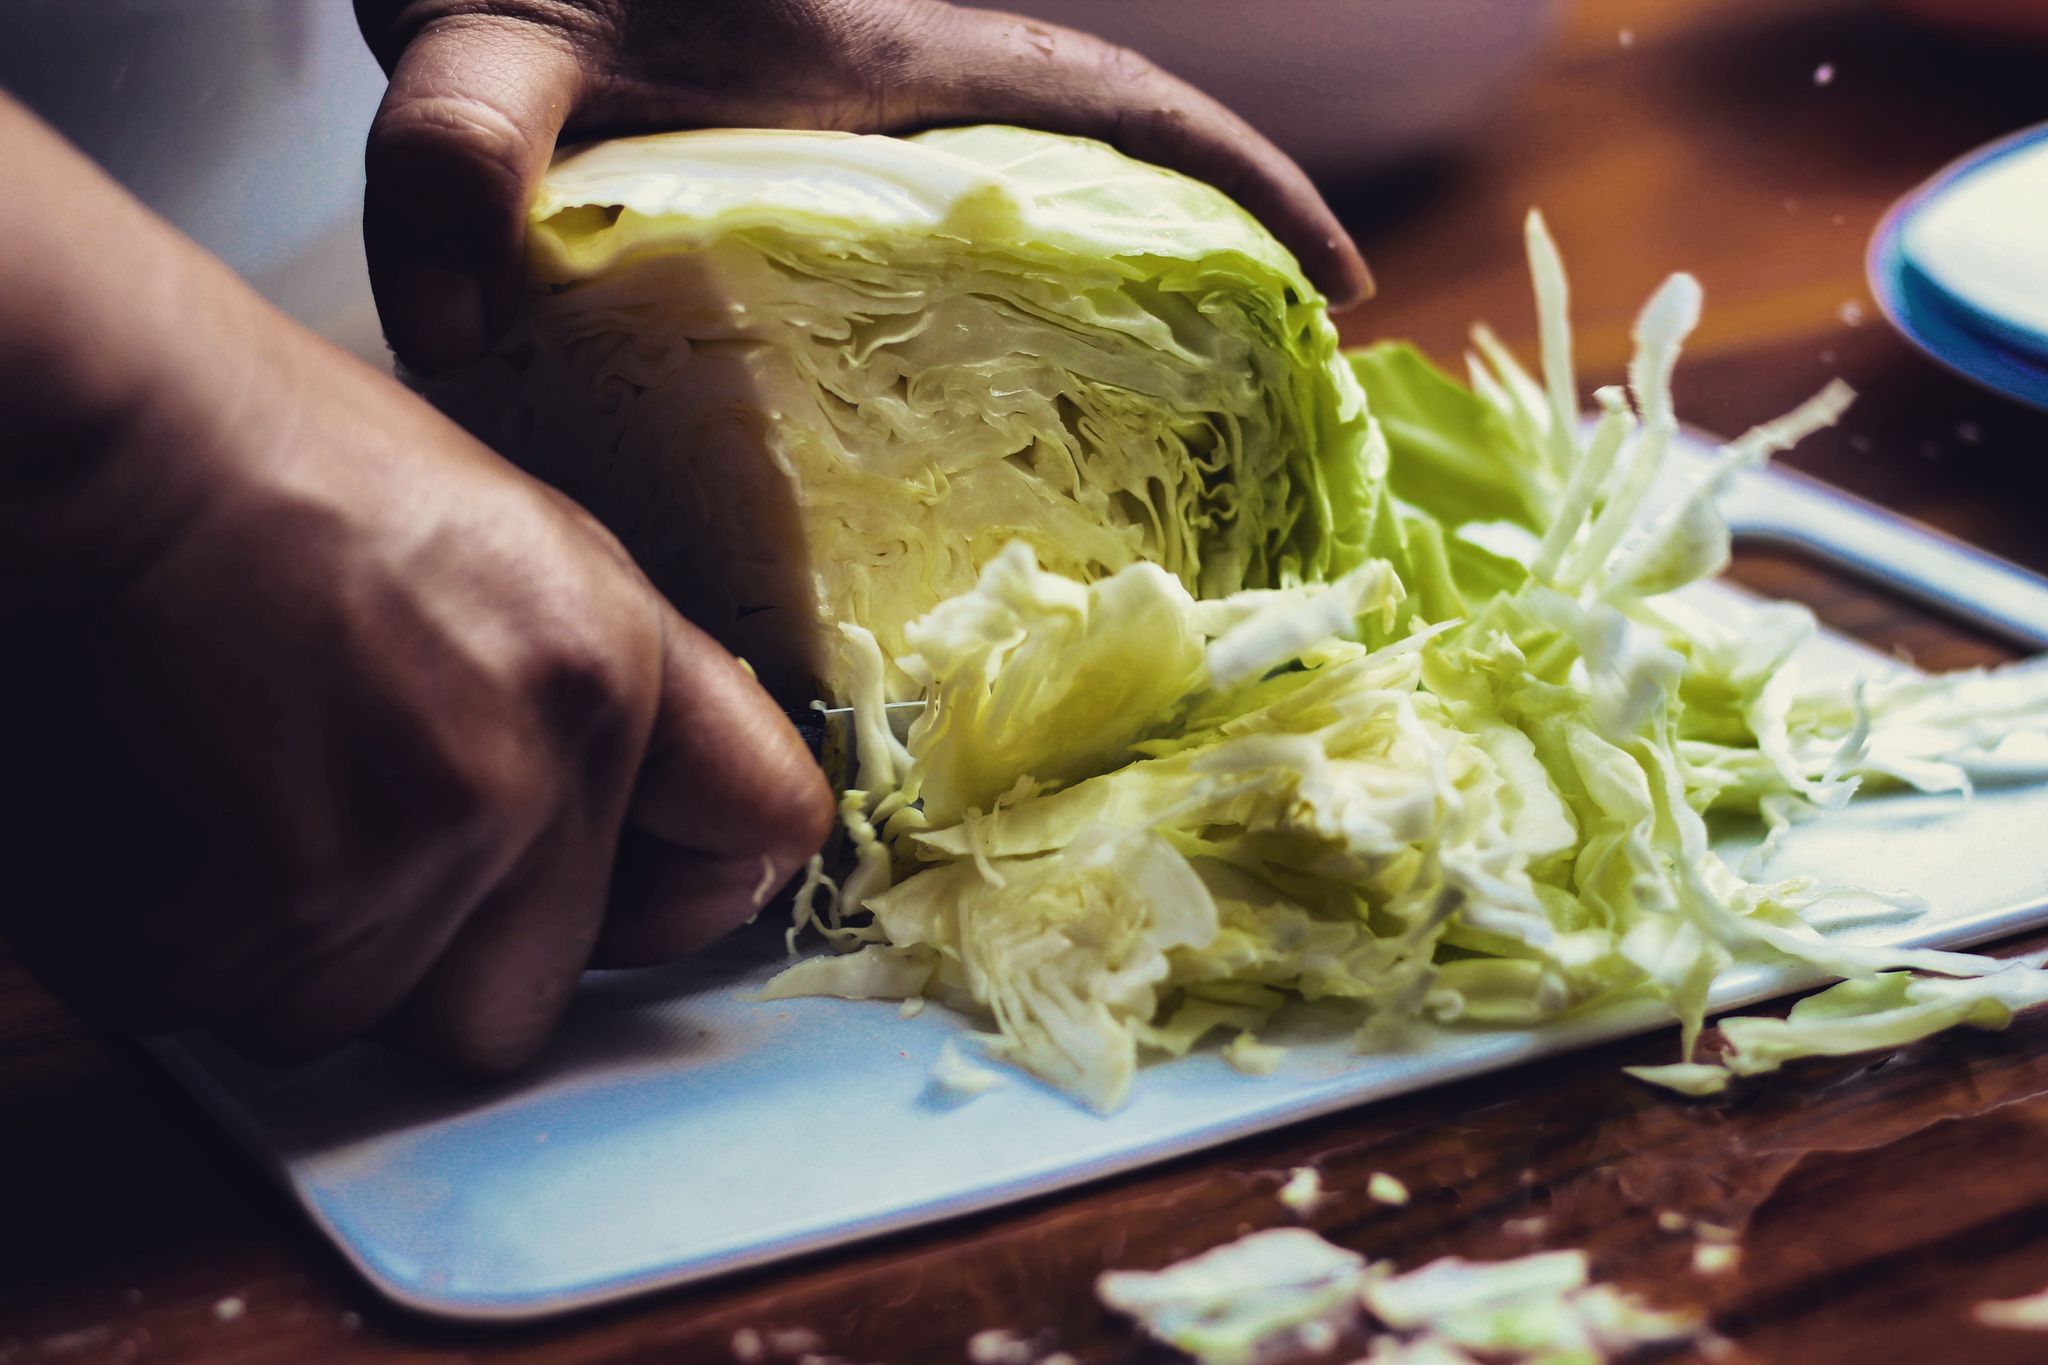 https://hips.hearstapps.com/hmg-prod/images/cropped-hands-of-person-cutting-cabbage-on-table-royalty-free-image-1624276579.jpg?resize=2048:*